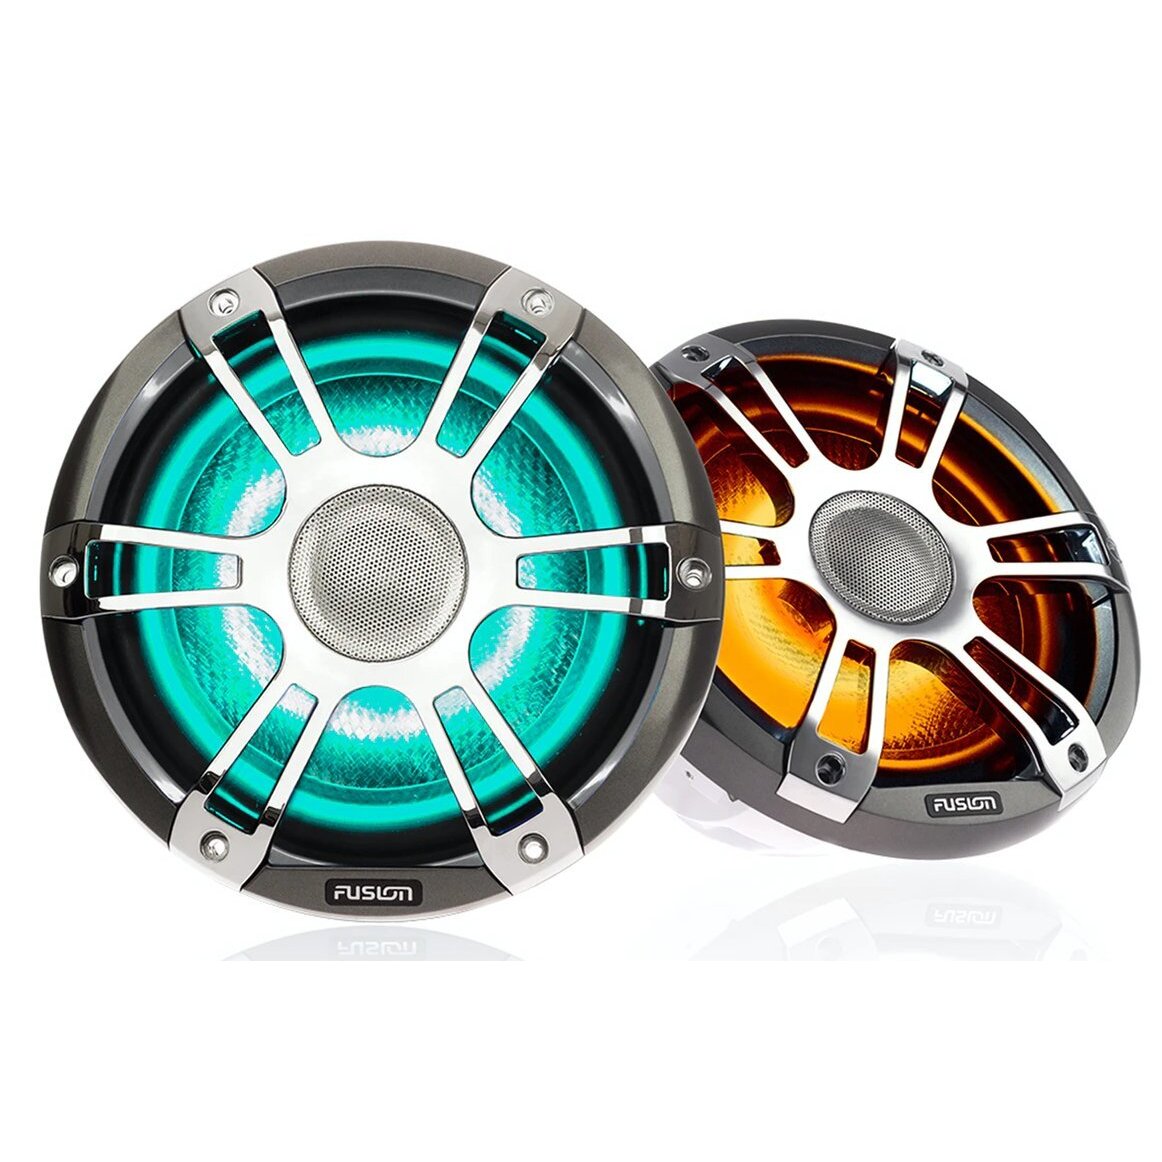 Fusion SG-CL652SPC Silver/Chrome 6.5" Signature Series 3 230 Watt Waterproof Marine Speakers With CRGBW LED Accent Lighting